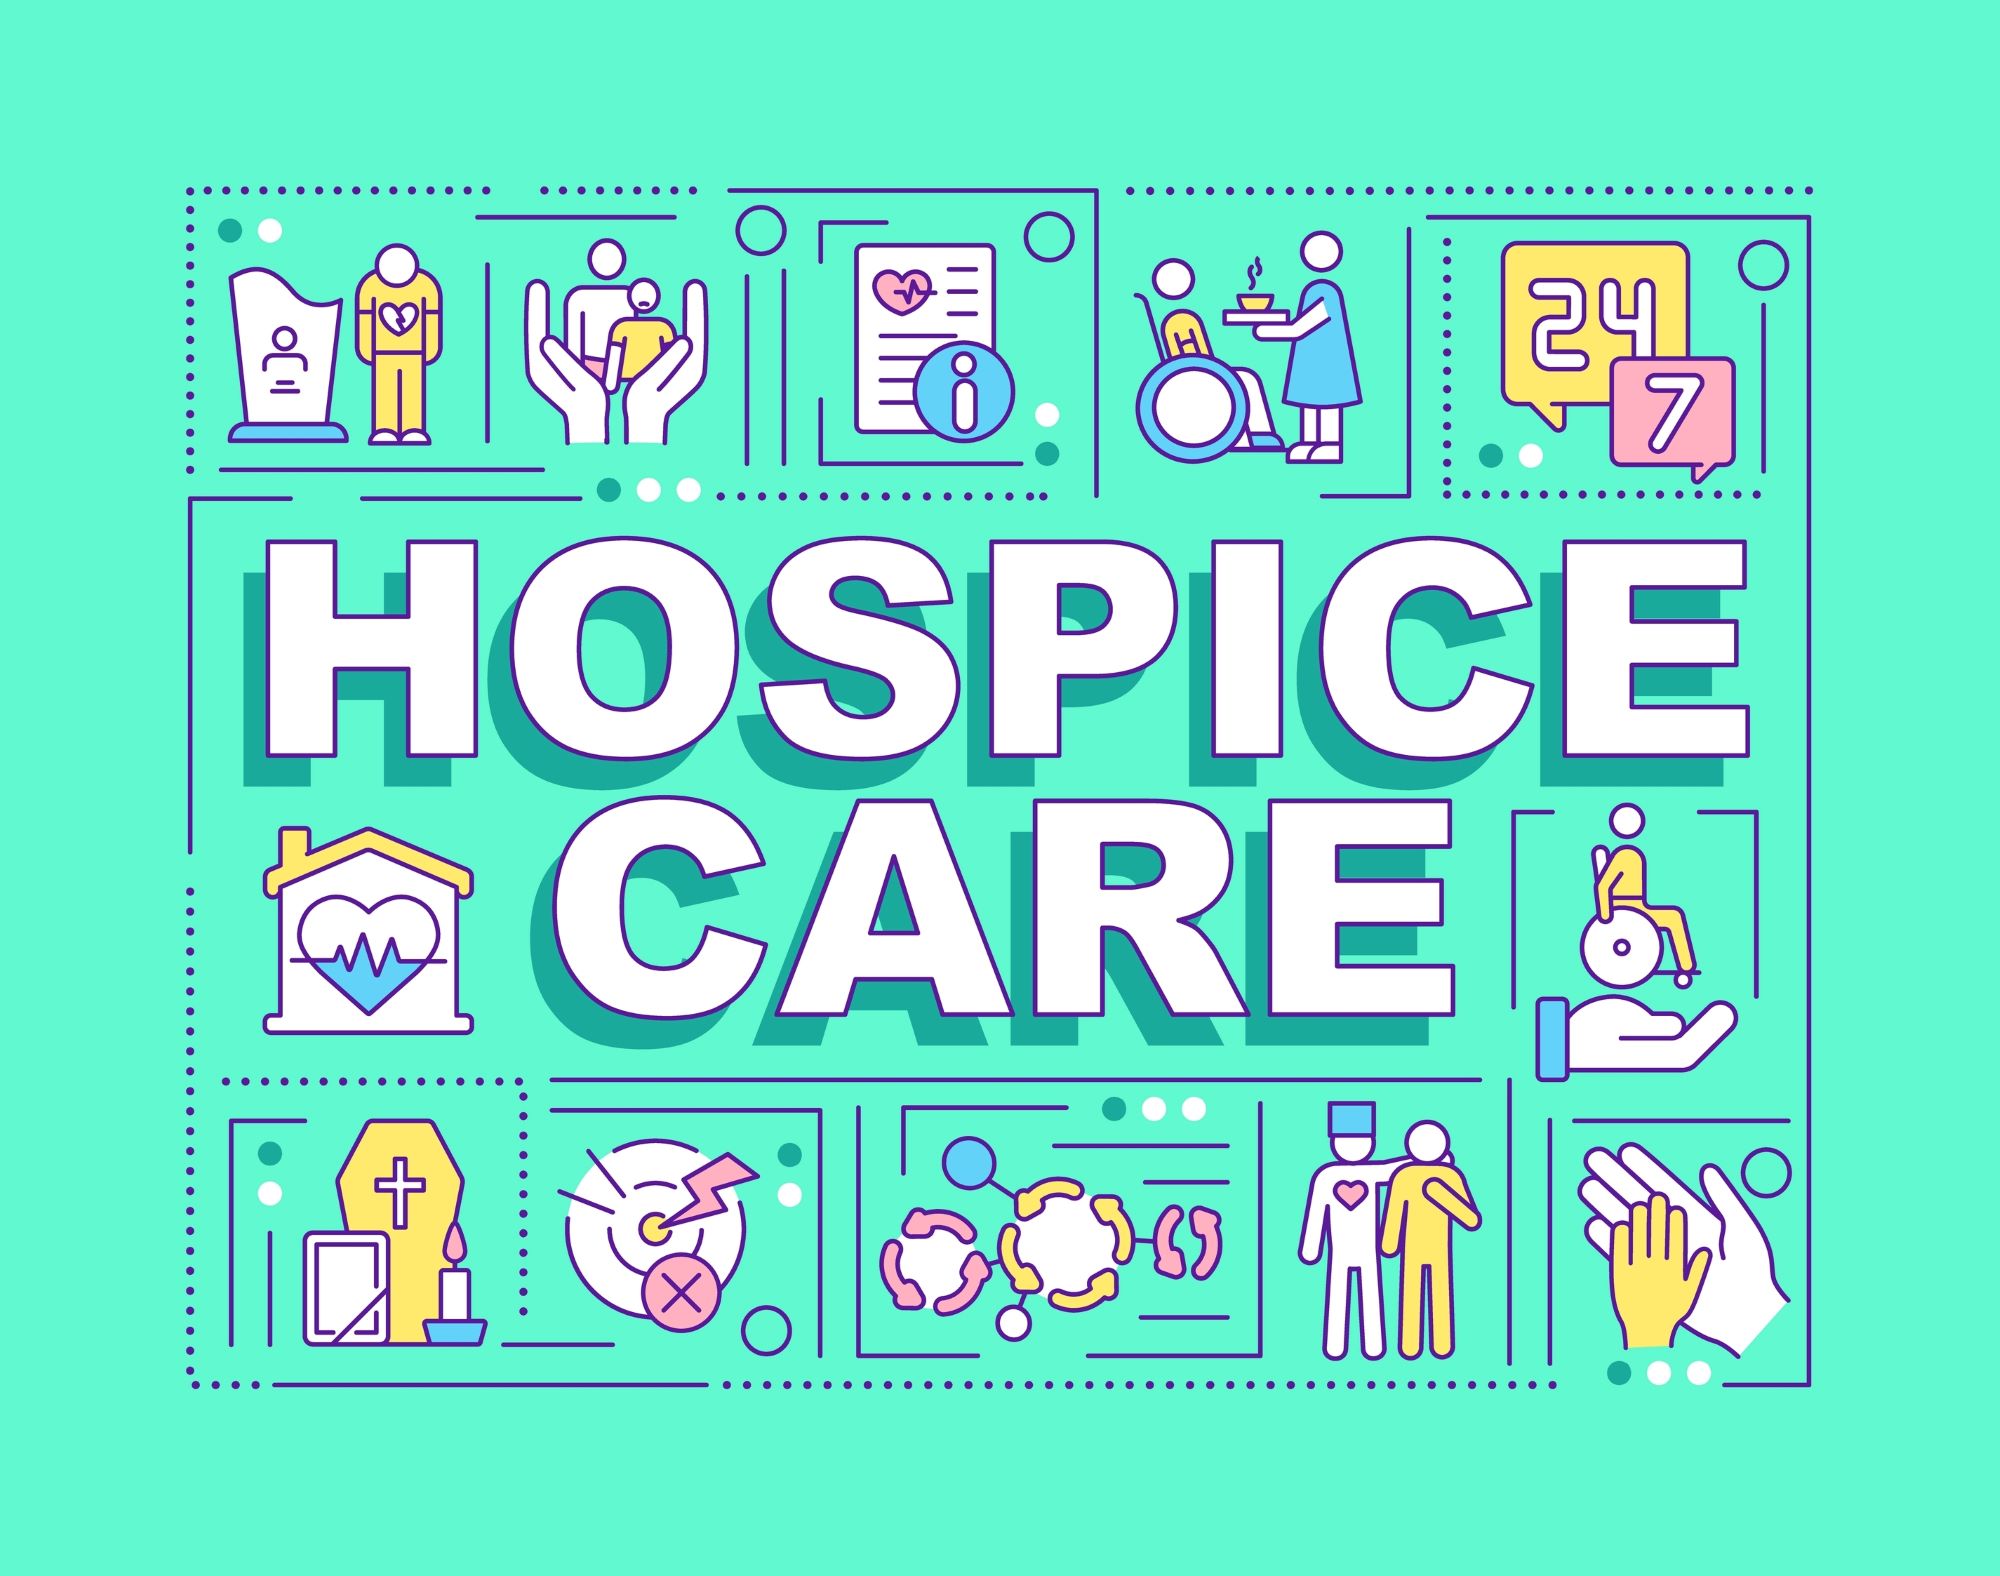 What Are The Four Types Of Hospice Care?